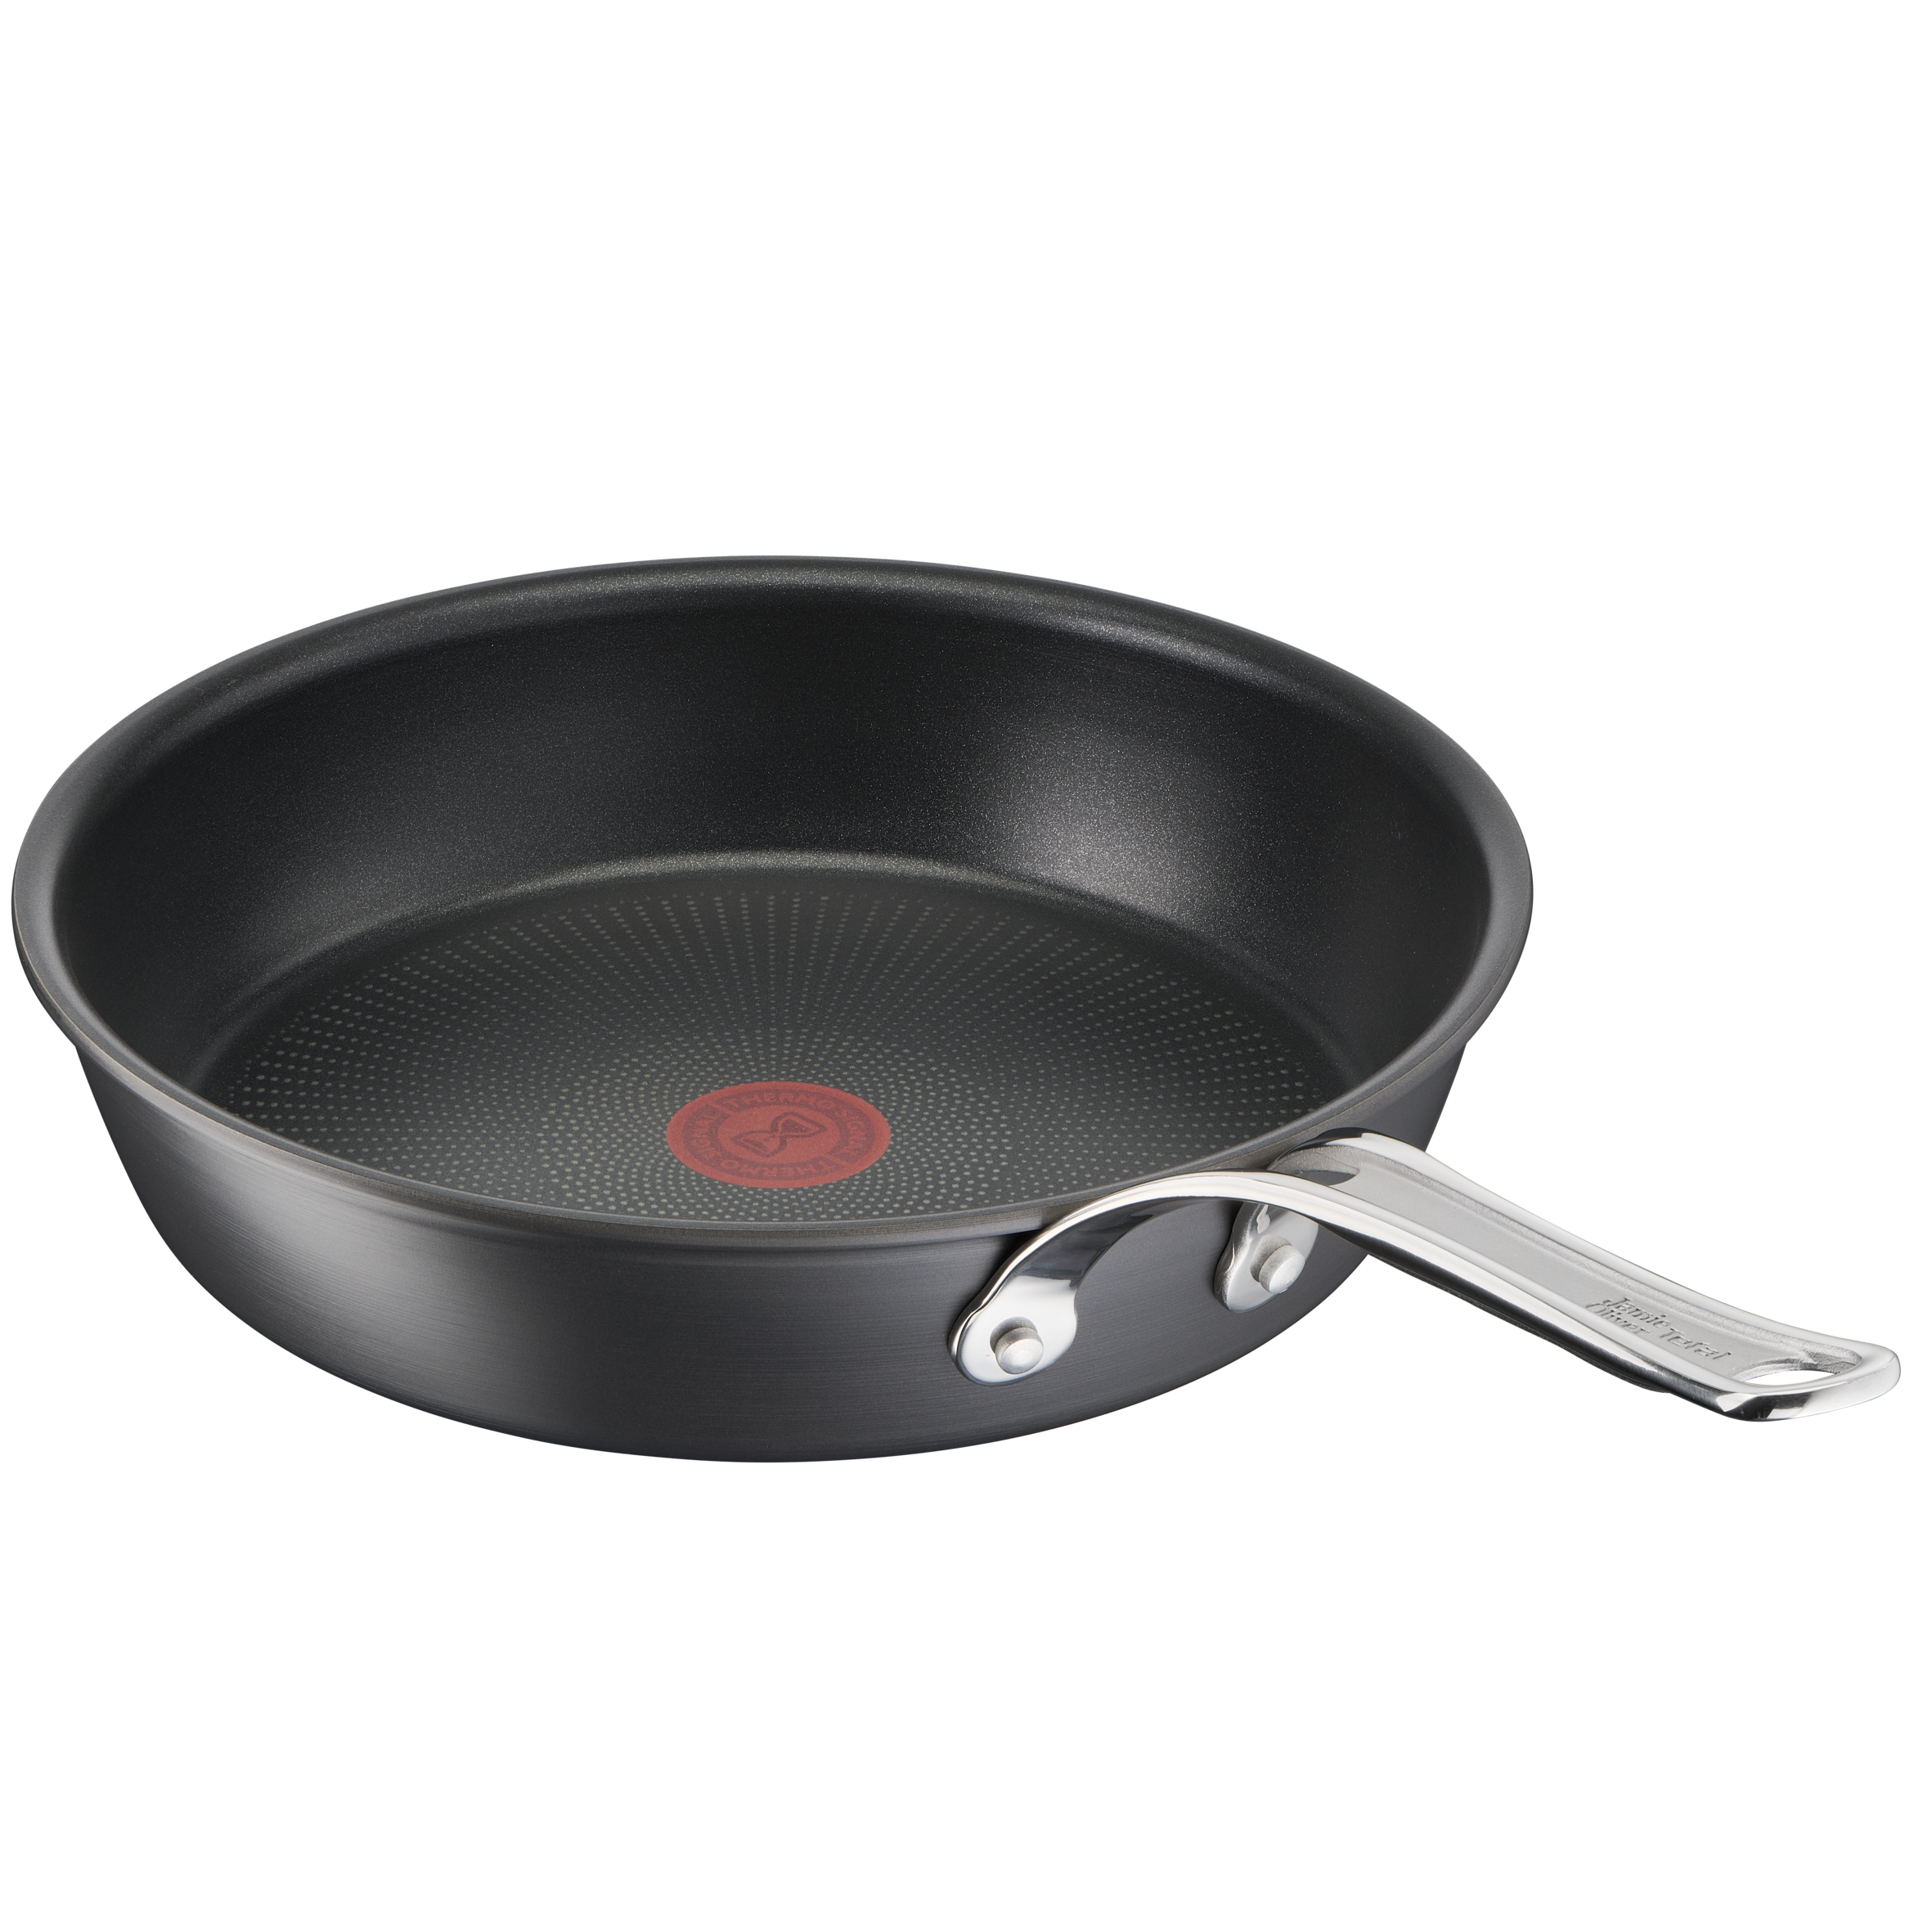 Jamie Oliver by Tefal Cooks Classic Non-Stick Induction Hard Anodised Frypan 24cm